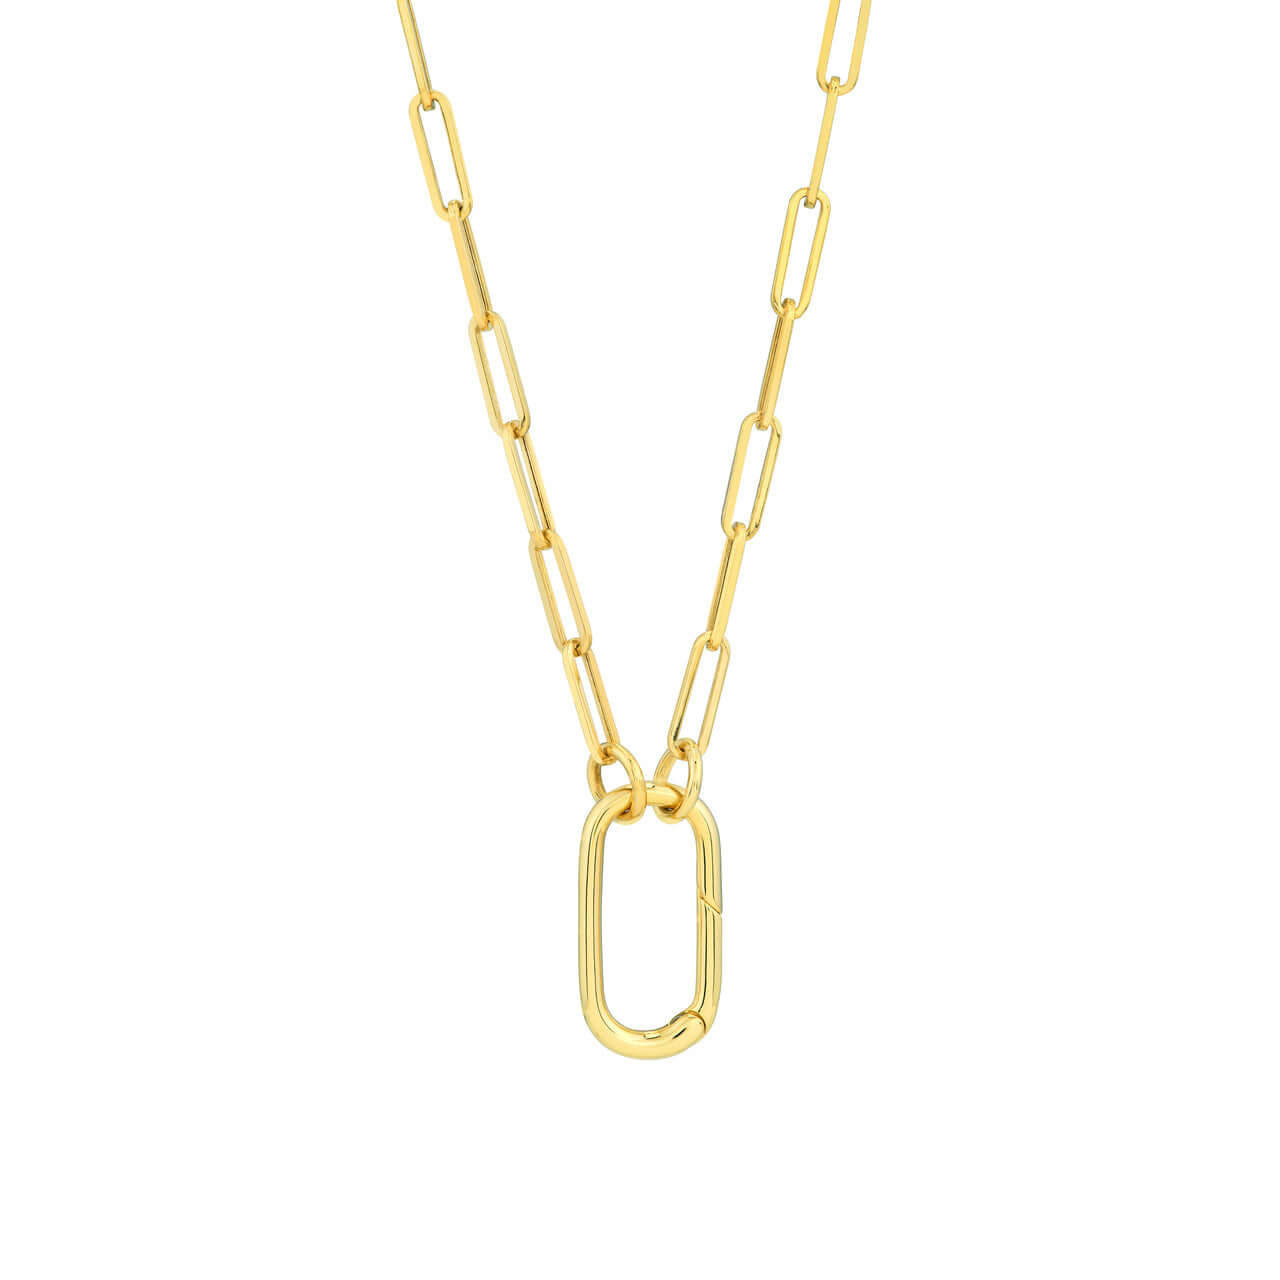 Wide Oval Push Lock Necklace | Lisa Robin